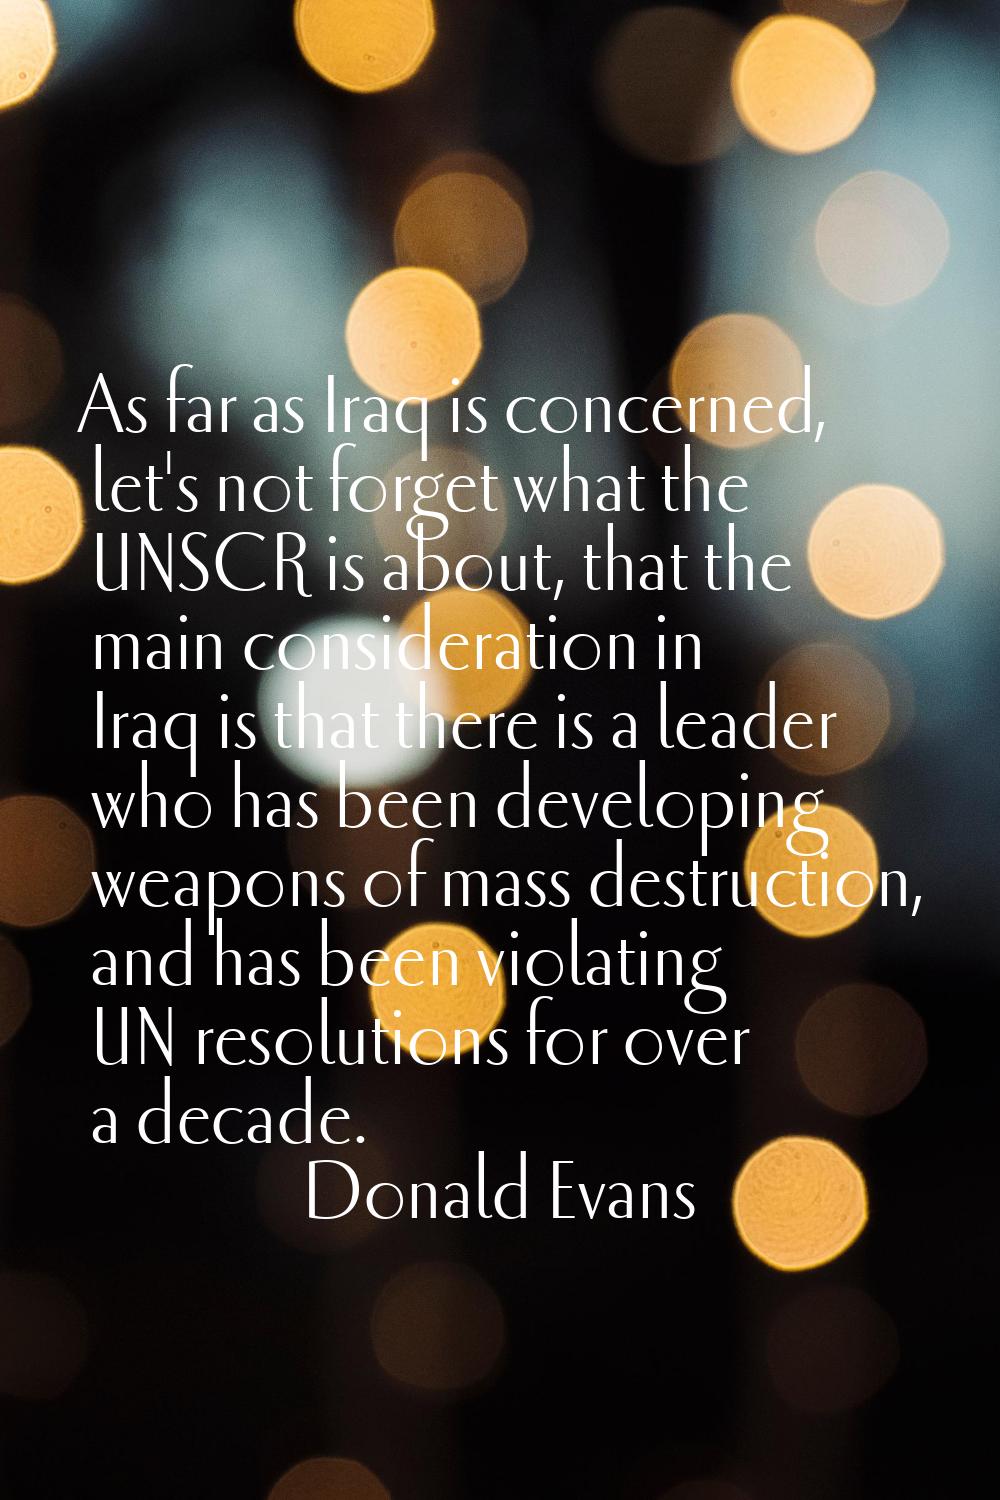 As far as Iraq is concerned, let's not forget what the UNSCR is about, that the main consideration 